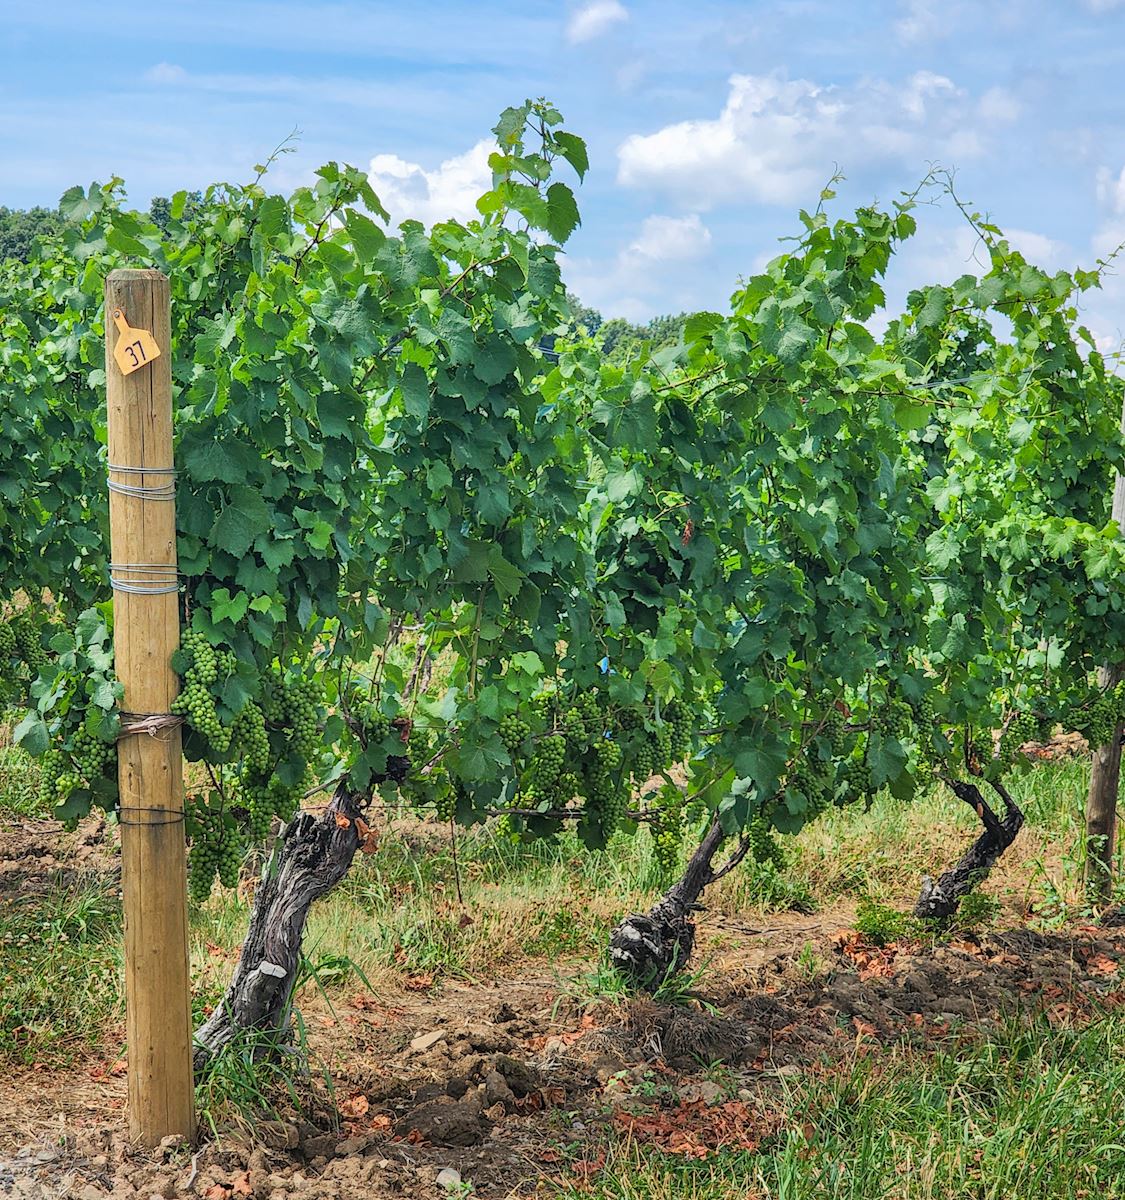 Vines at the Fox Run Vineyard are shown. The leaves are bright green, and the green grapes are hanging in bunches. The sky is blue in the background with light clouds. 